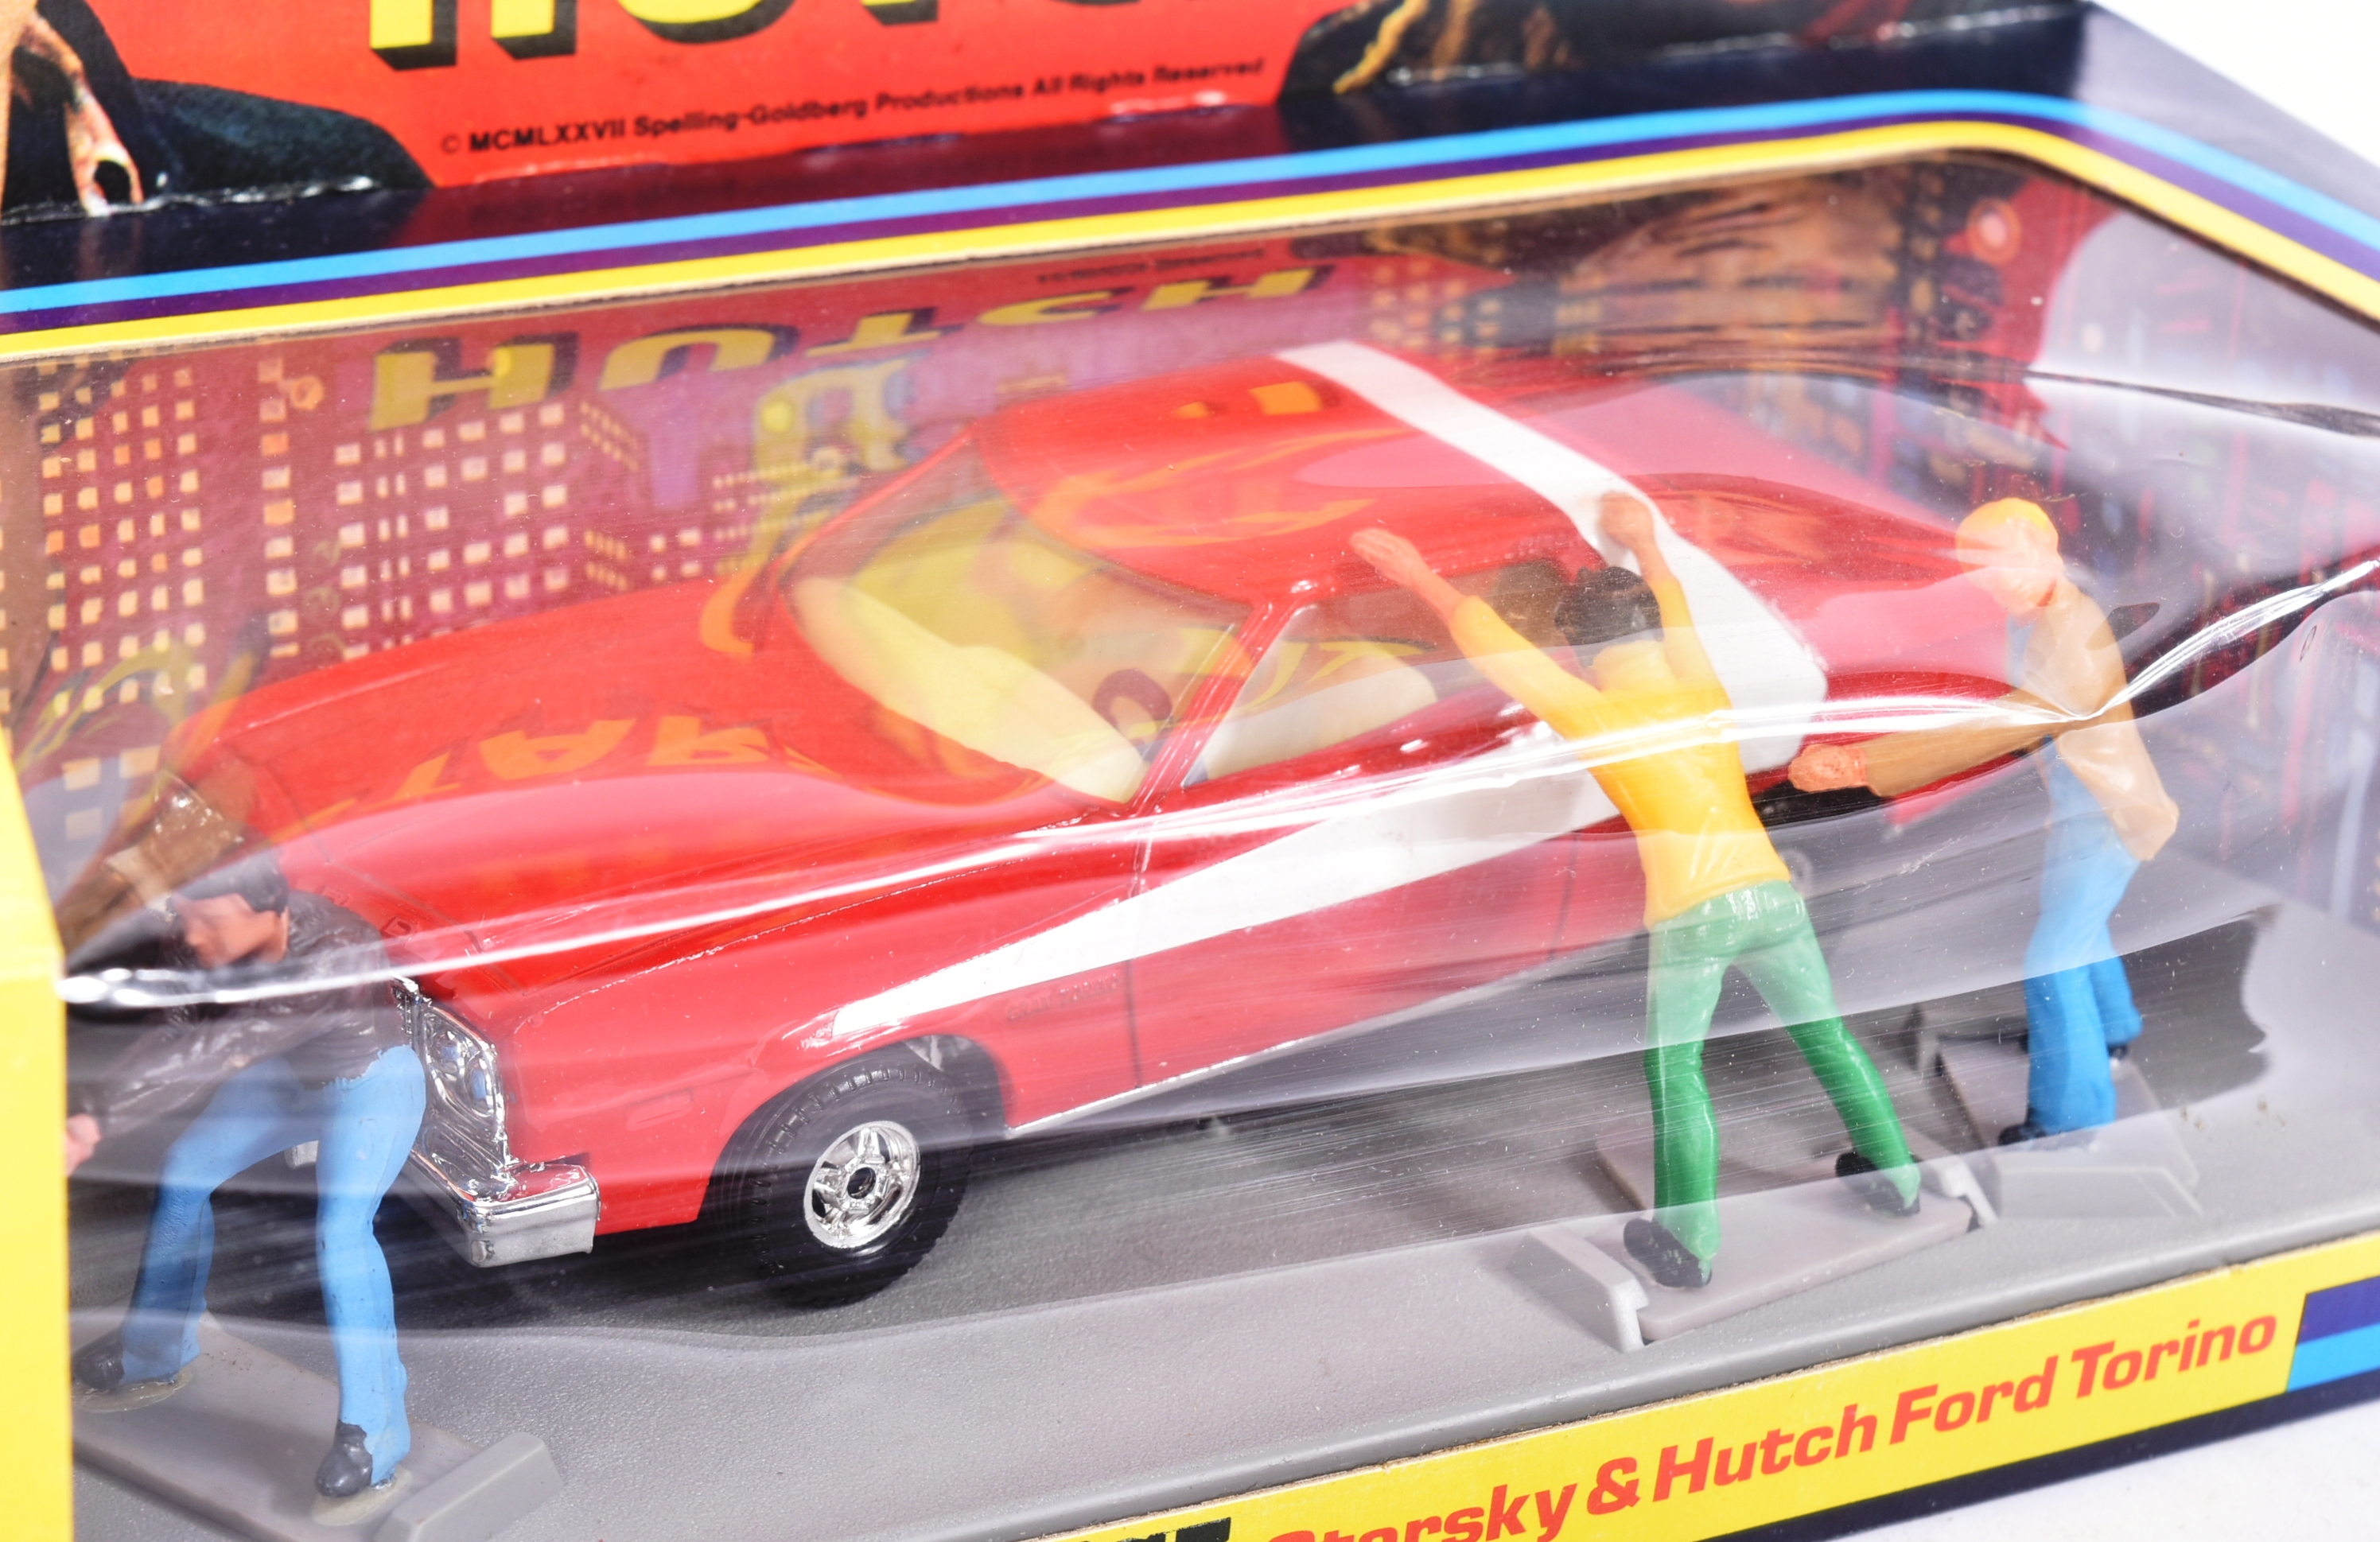 DIECAST - VINTAGE CORGI STARSKY & HUTCH FORD TORINO MODEL WITH FIGURES - Image 2 of 3